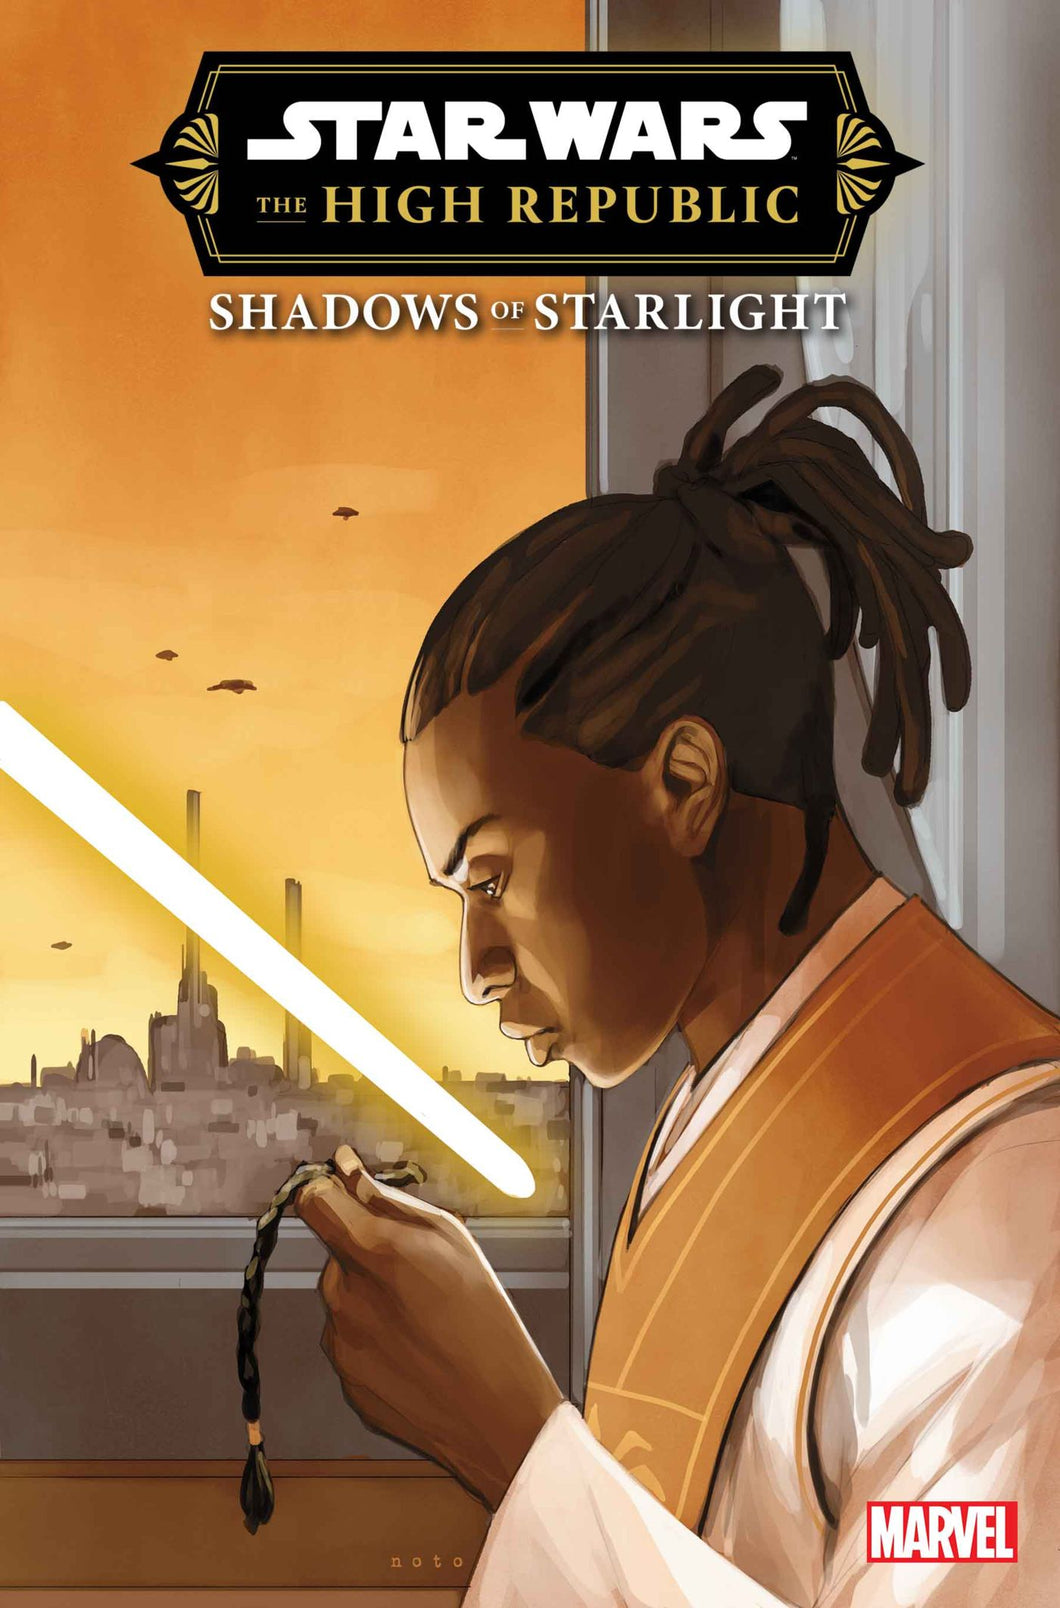 STAR WARS: THE HIGH REPUBLIC - SHADOWS OF STARLIGHT #3 (PHILL NOTO COVER)